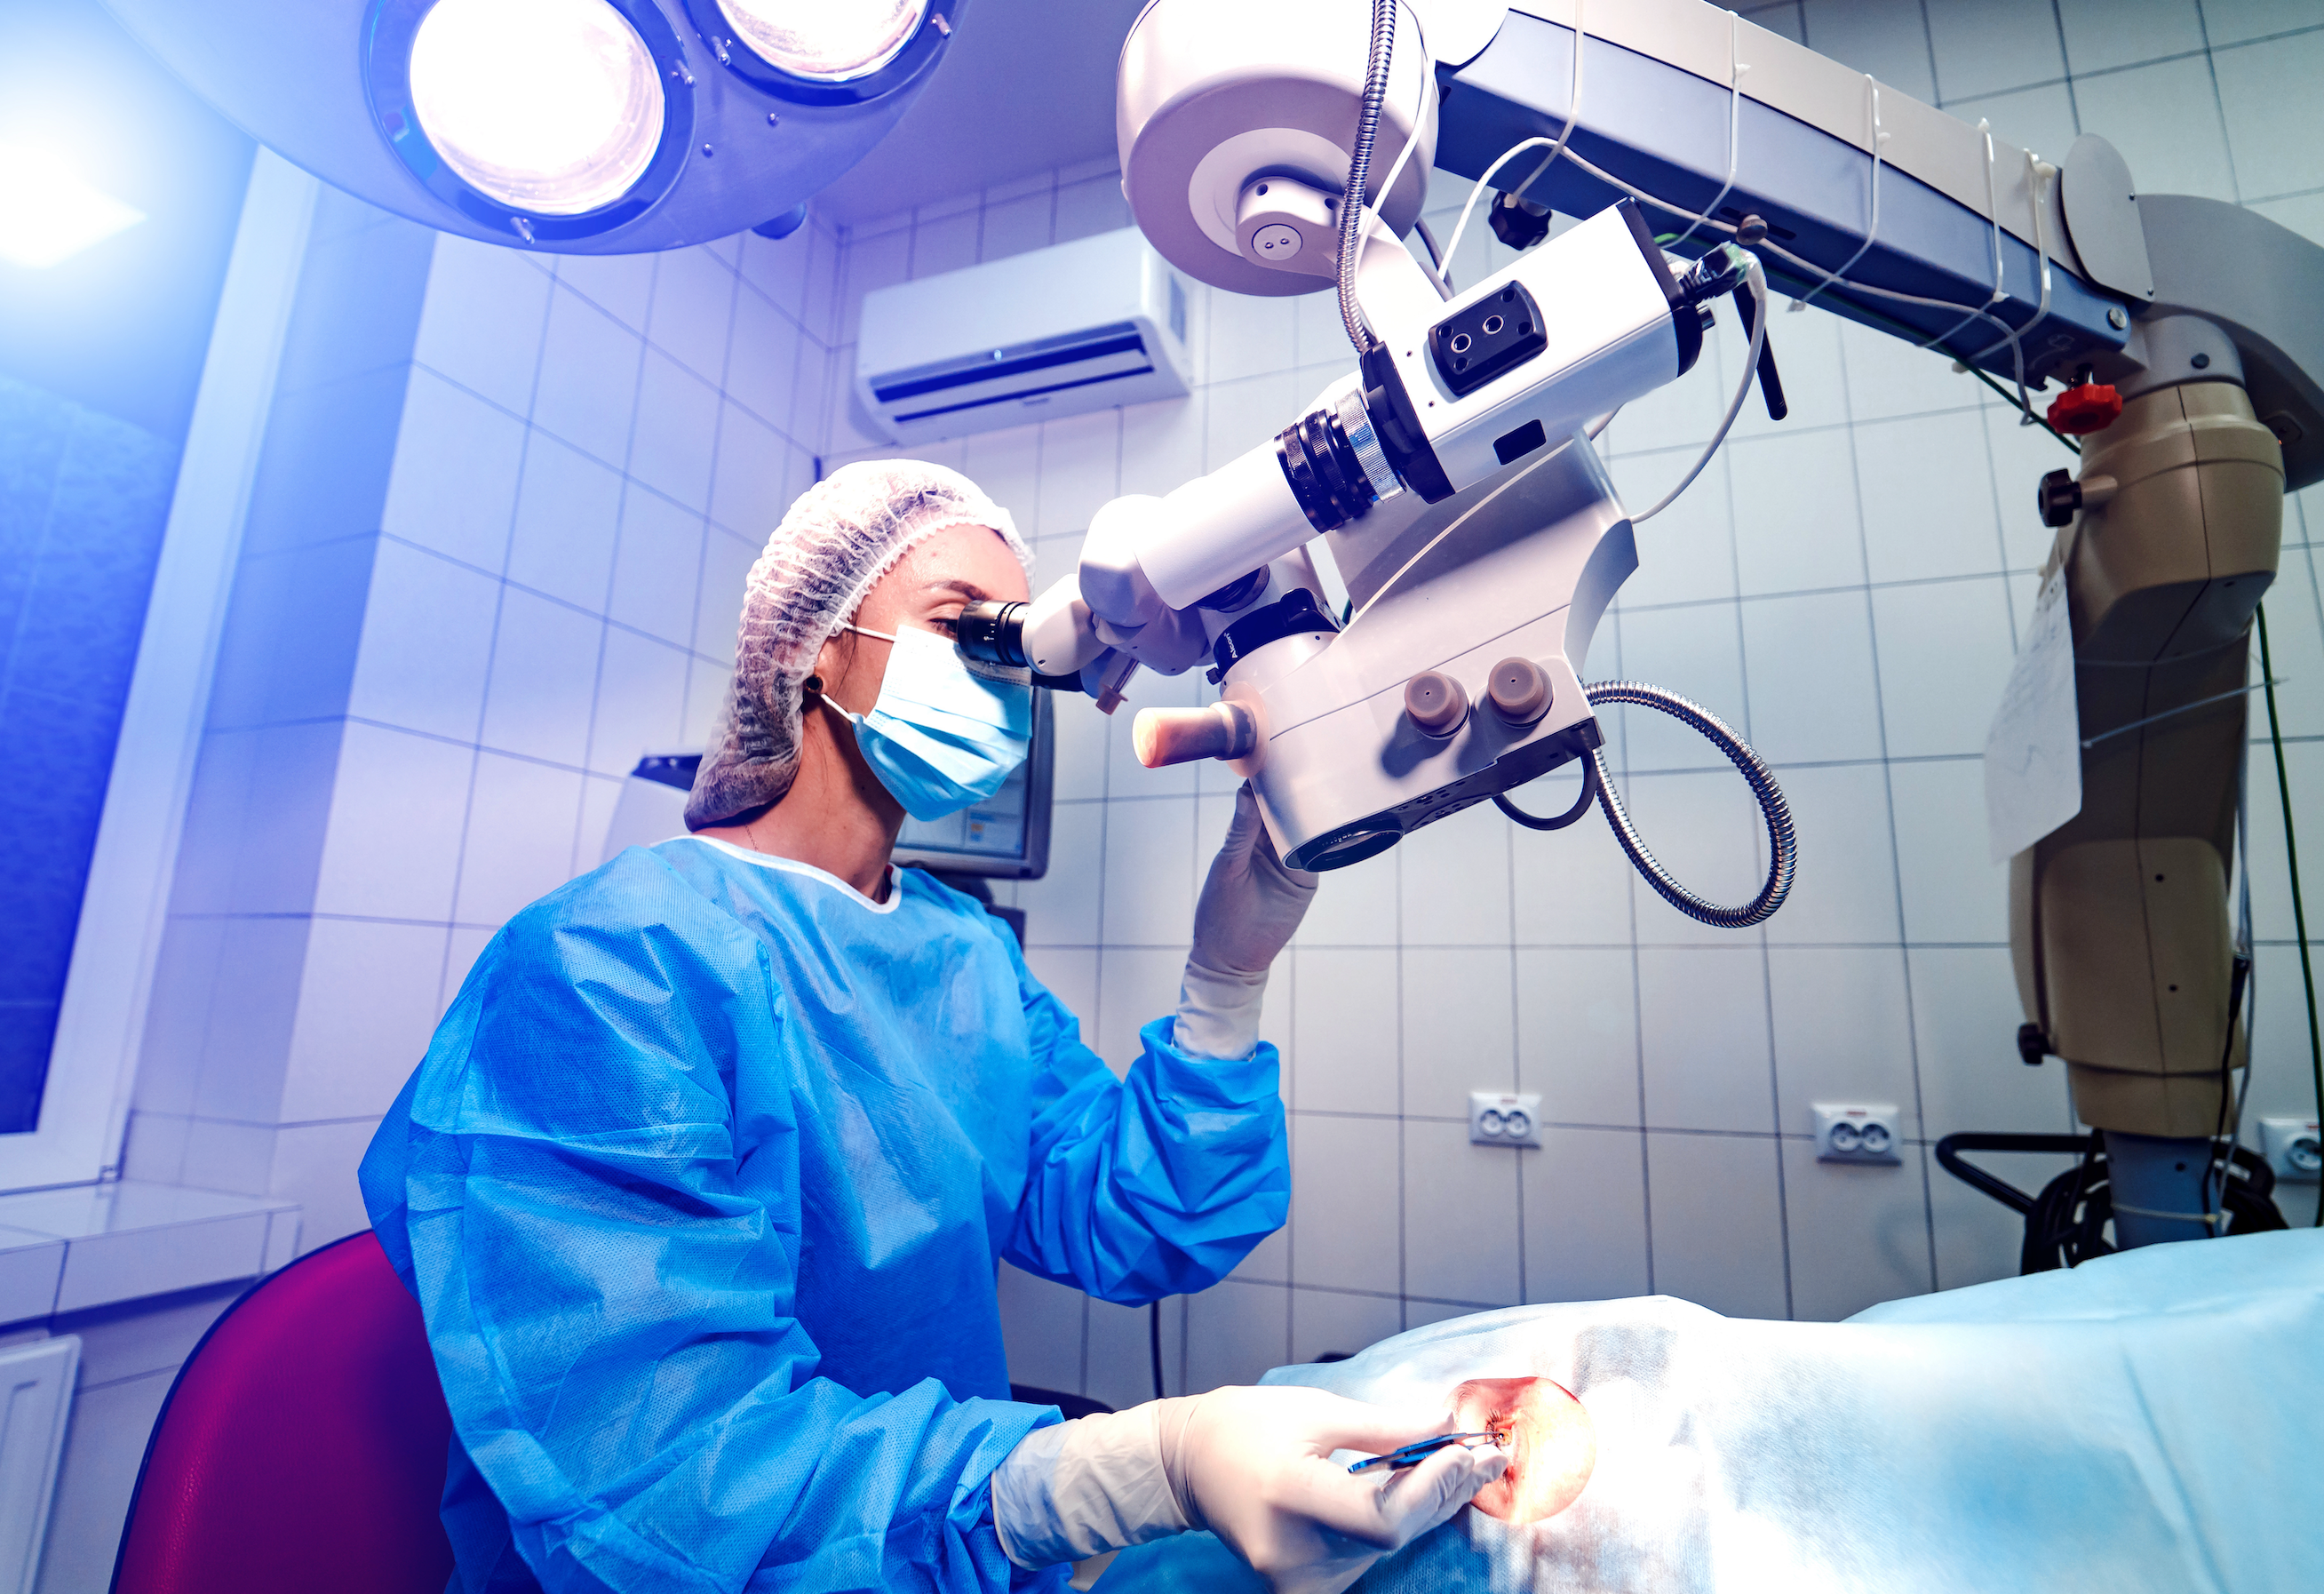 XEN continues to evolve for use in glaucoma surgery